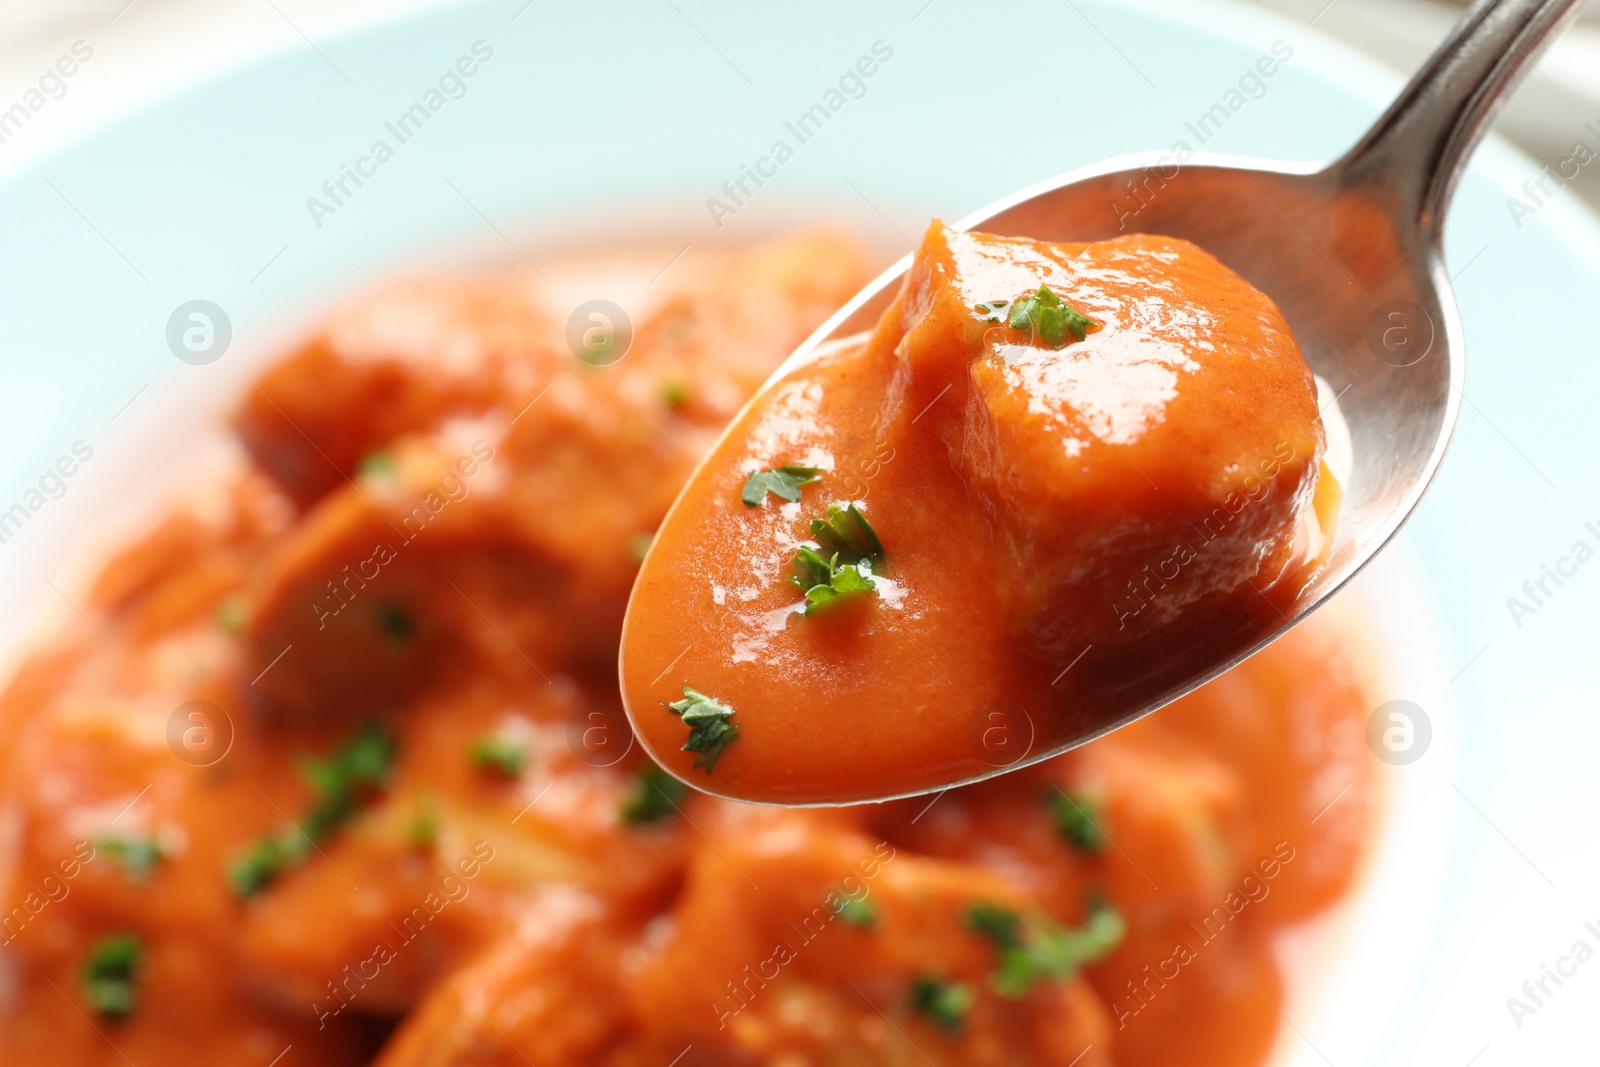 Photo of Tasty butter chicken in spoon over plate with meal. Traditional Murgh Makhani dish